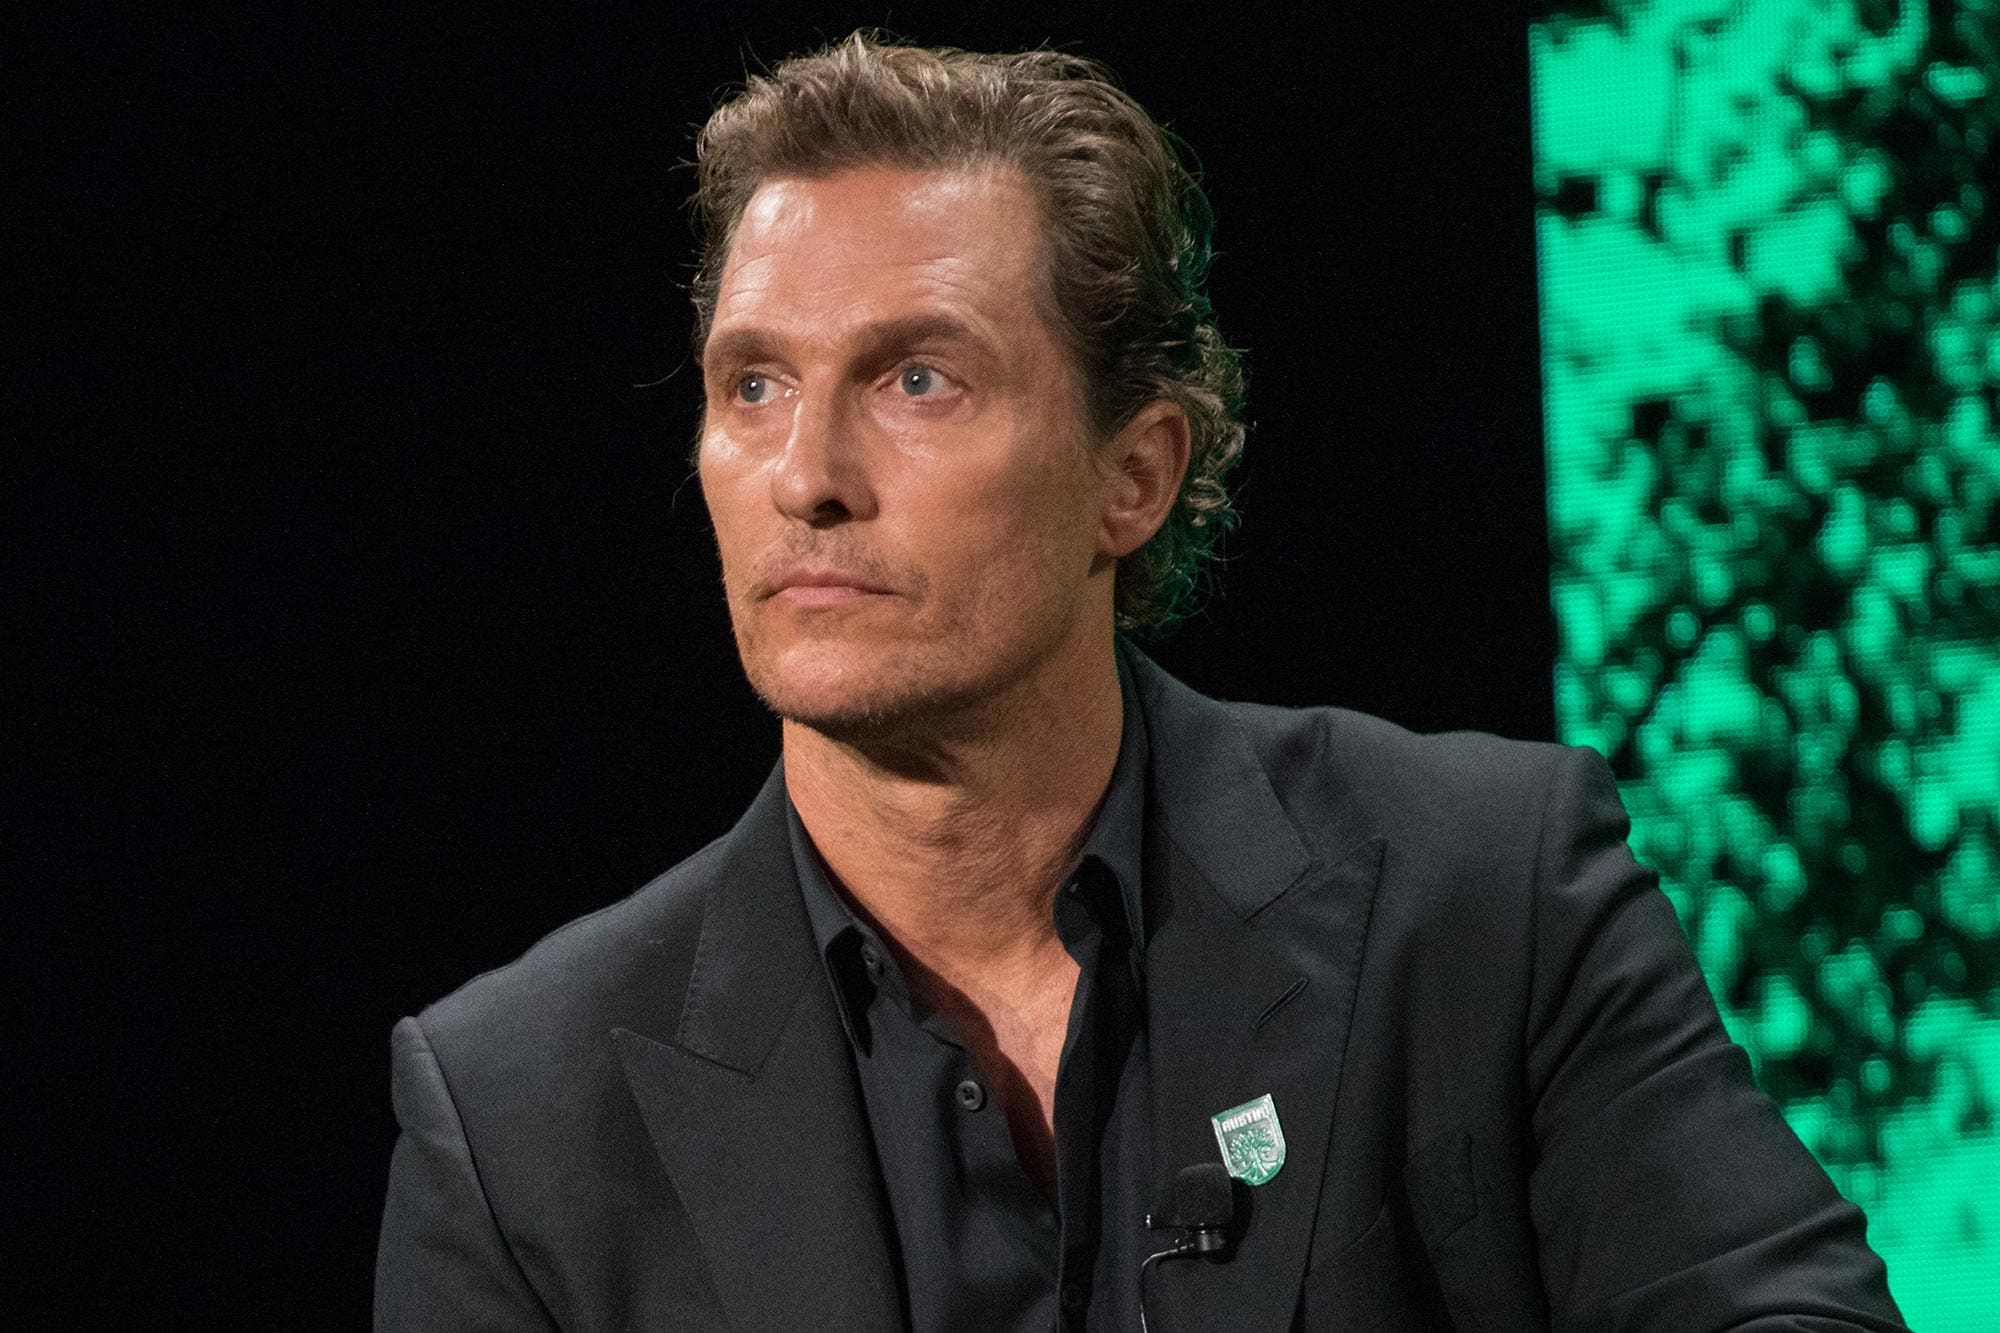 ”mathew-mcconaughey-speaks-out-against-gun-violence-at-the-white-house”